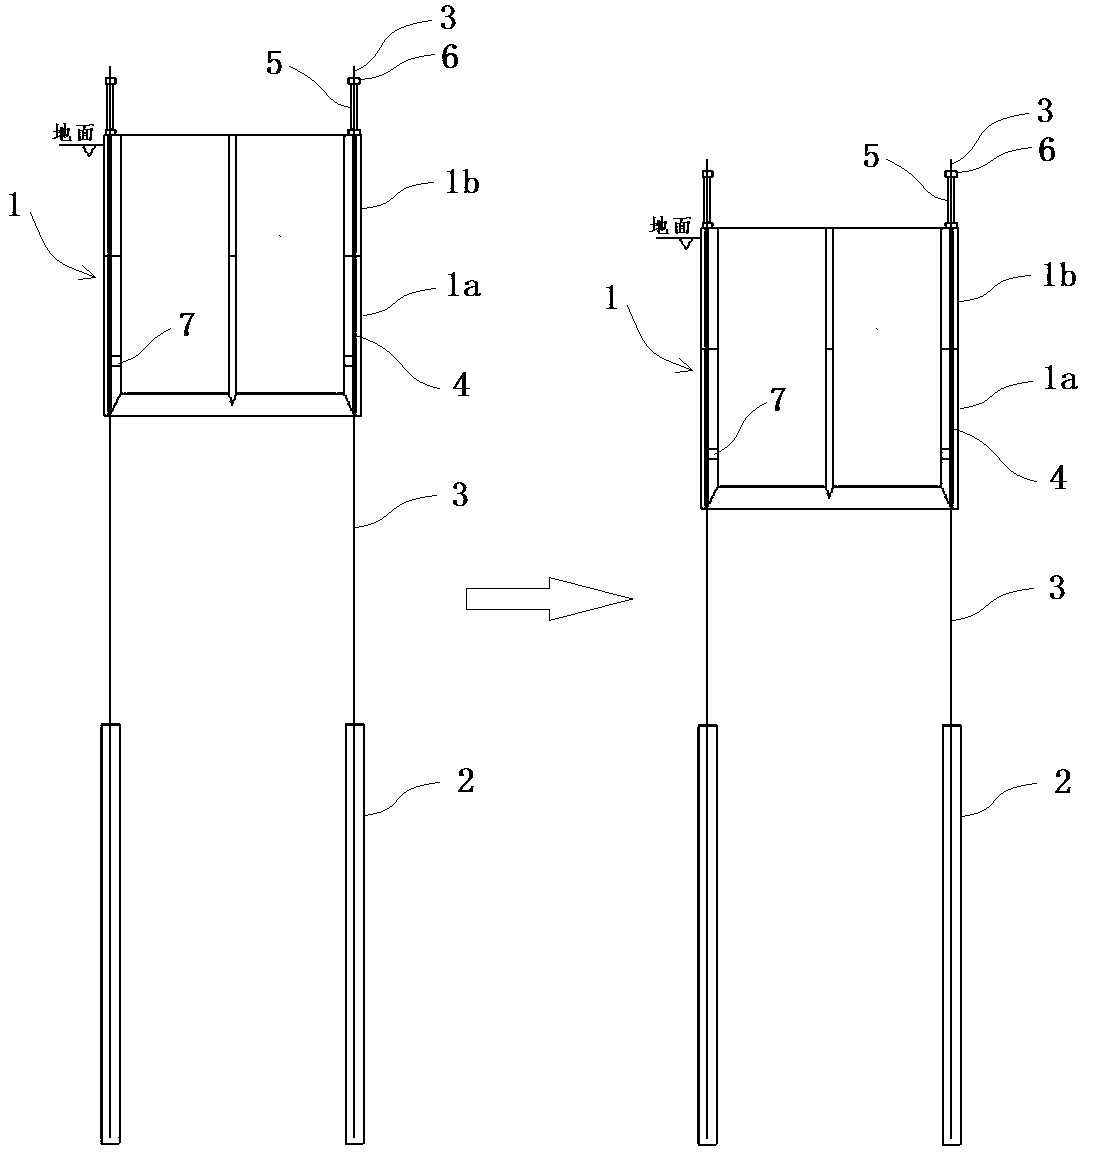 Piled anchor press-in type caisson sinking construction method